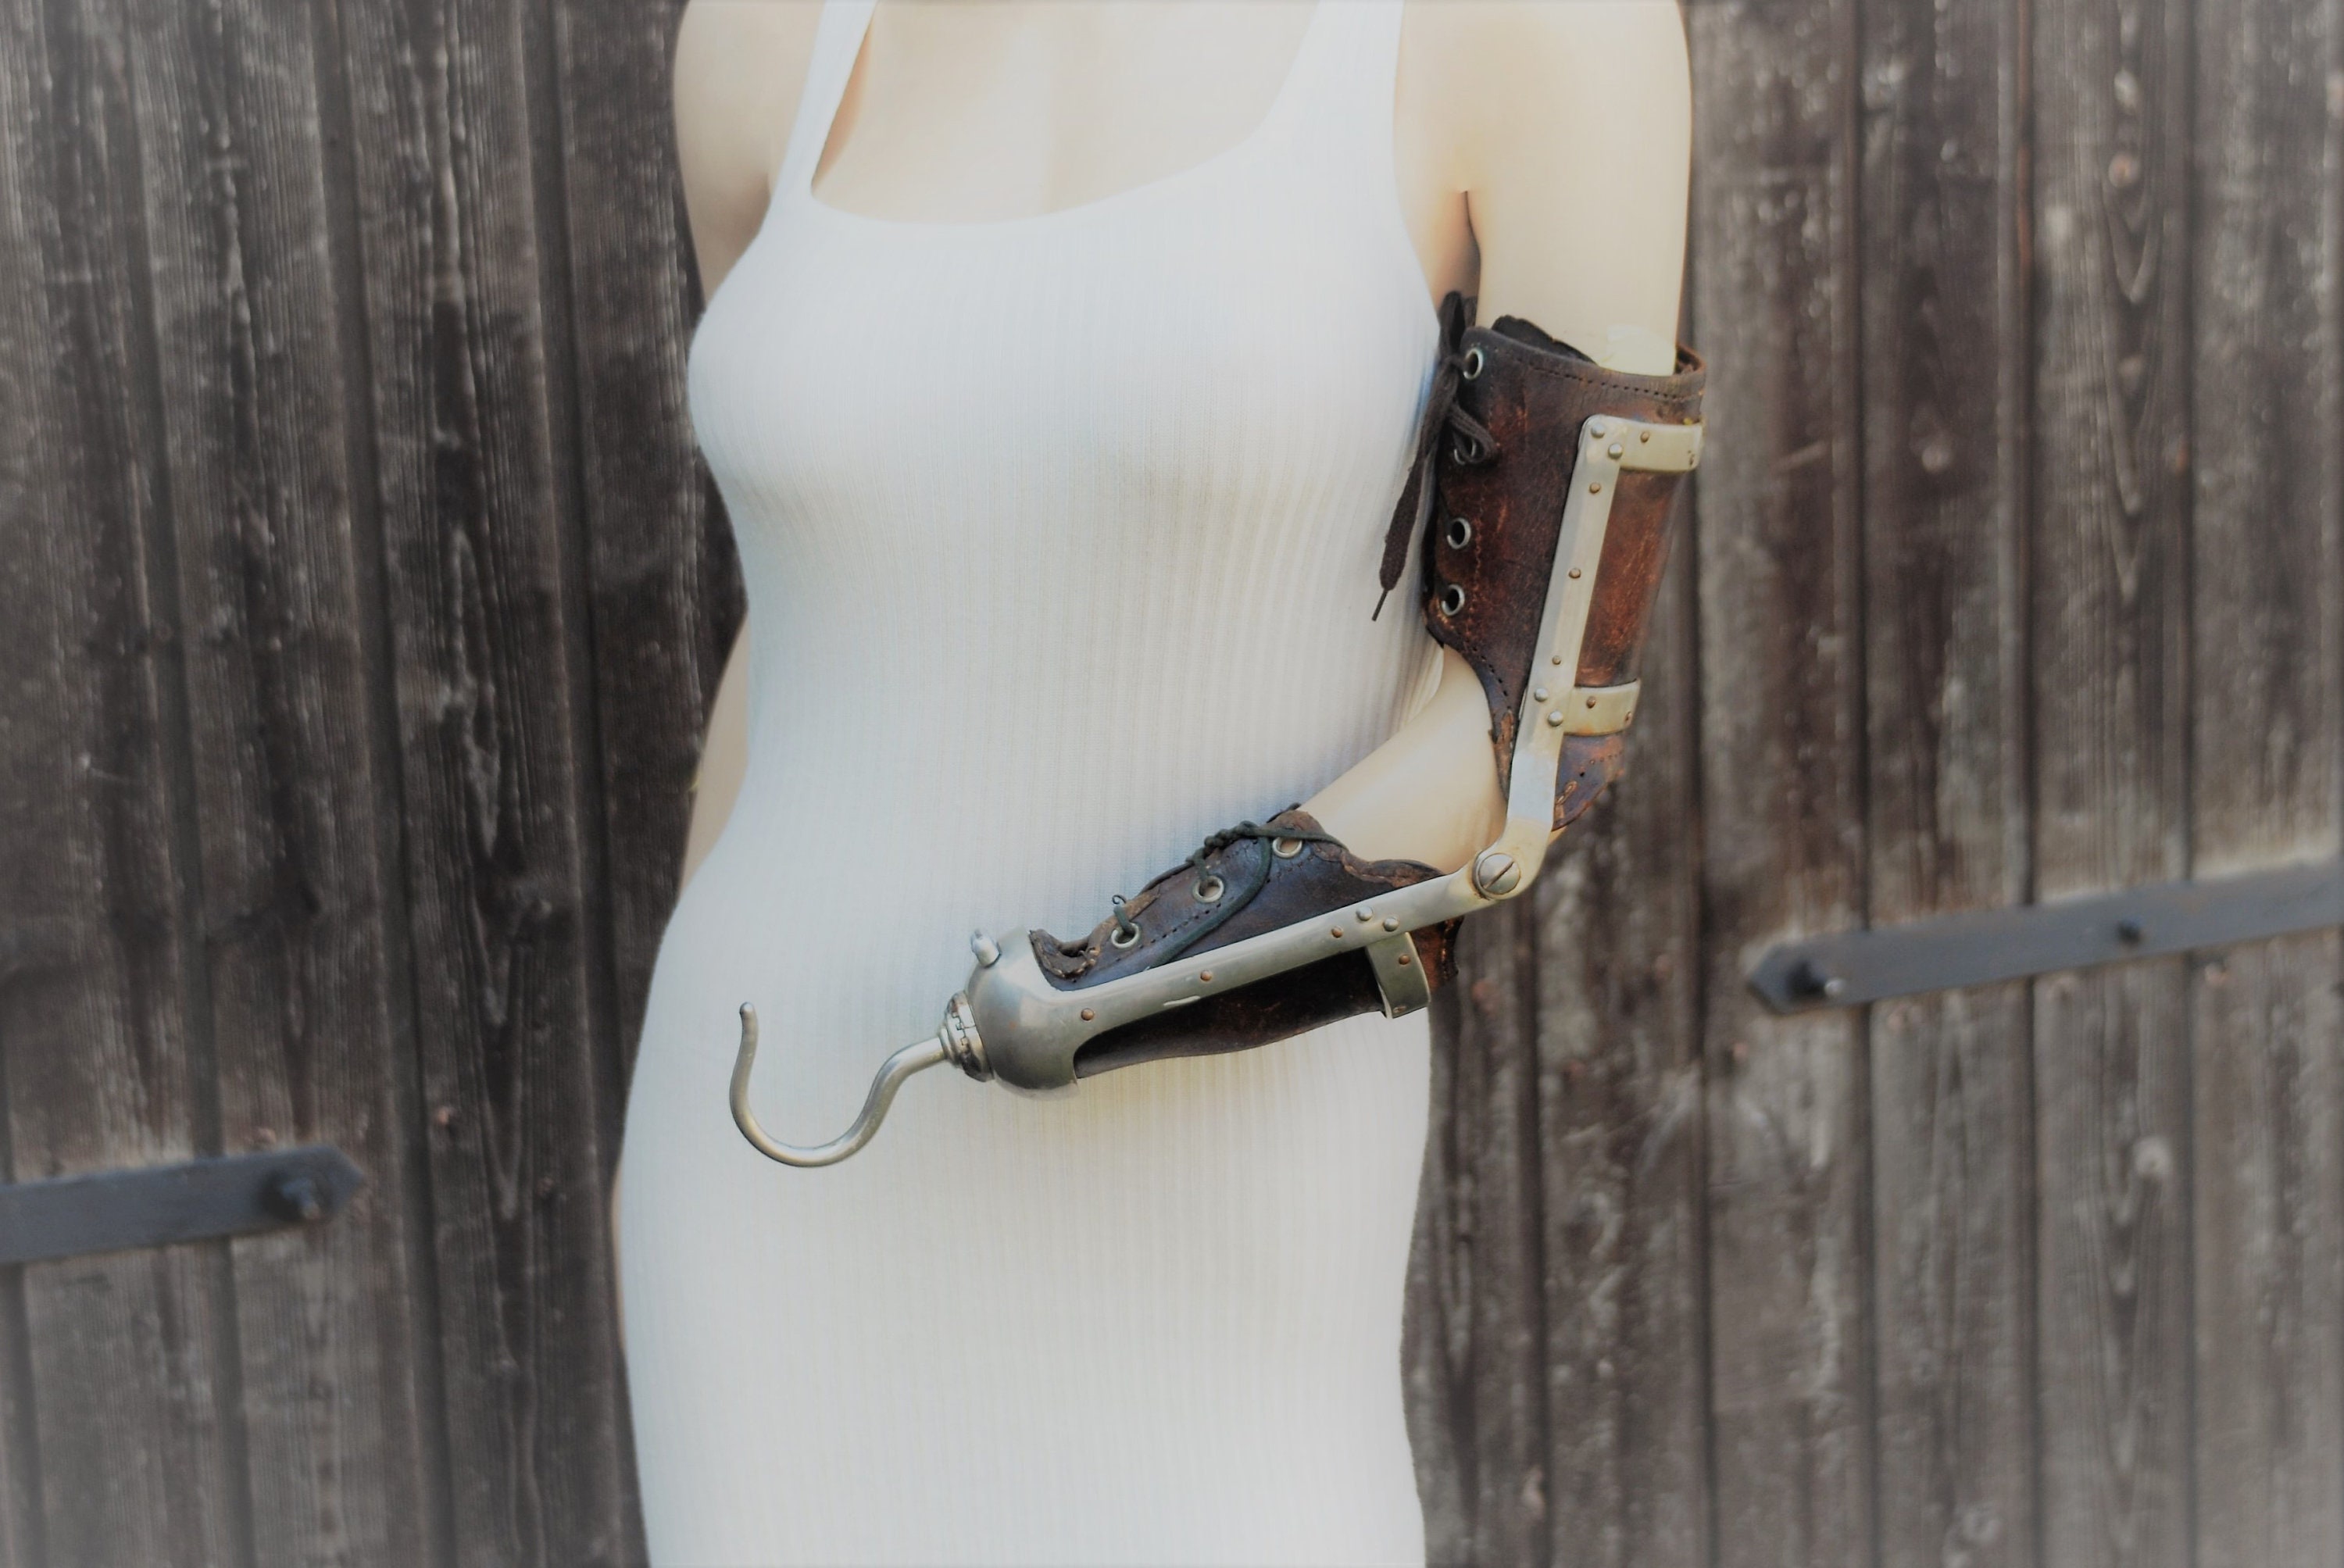 Very Rare Vintage Womens Prosthetic Arm Amputee With Work Hook Attachment  Steampunk -  Canada